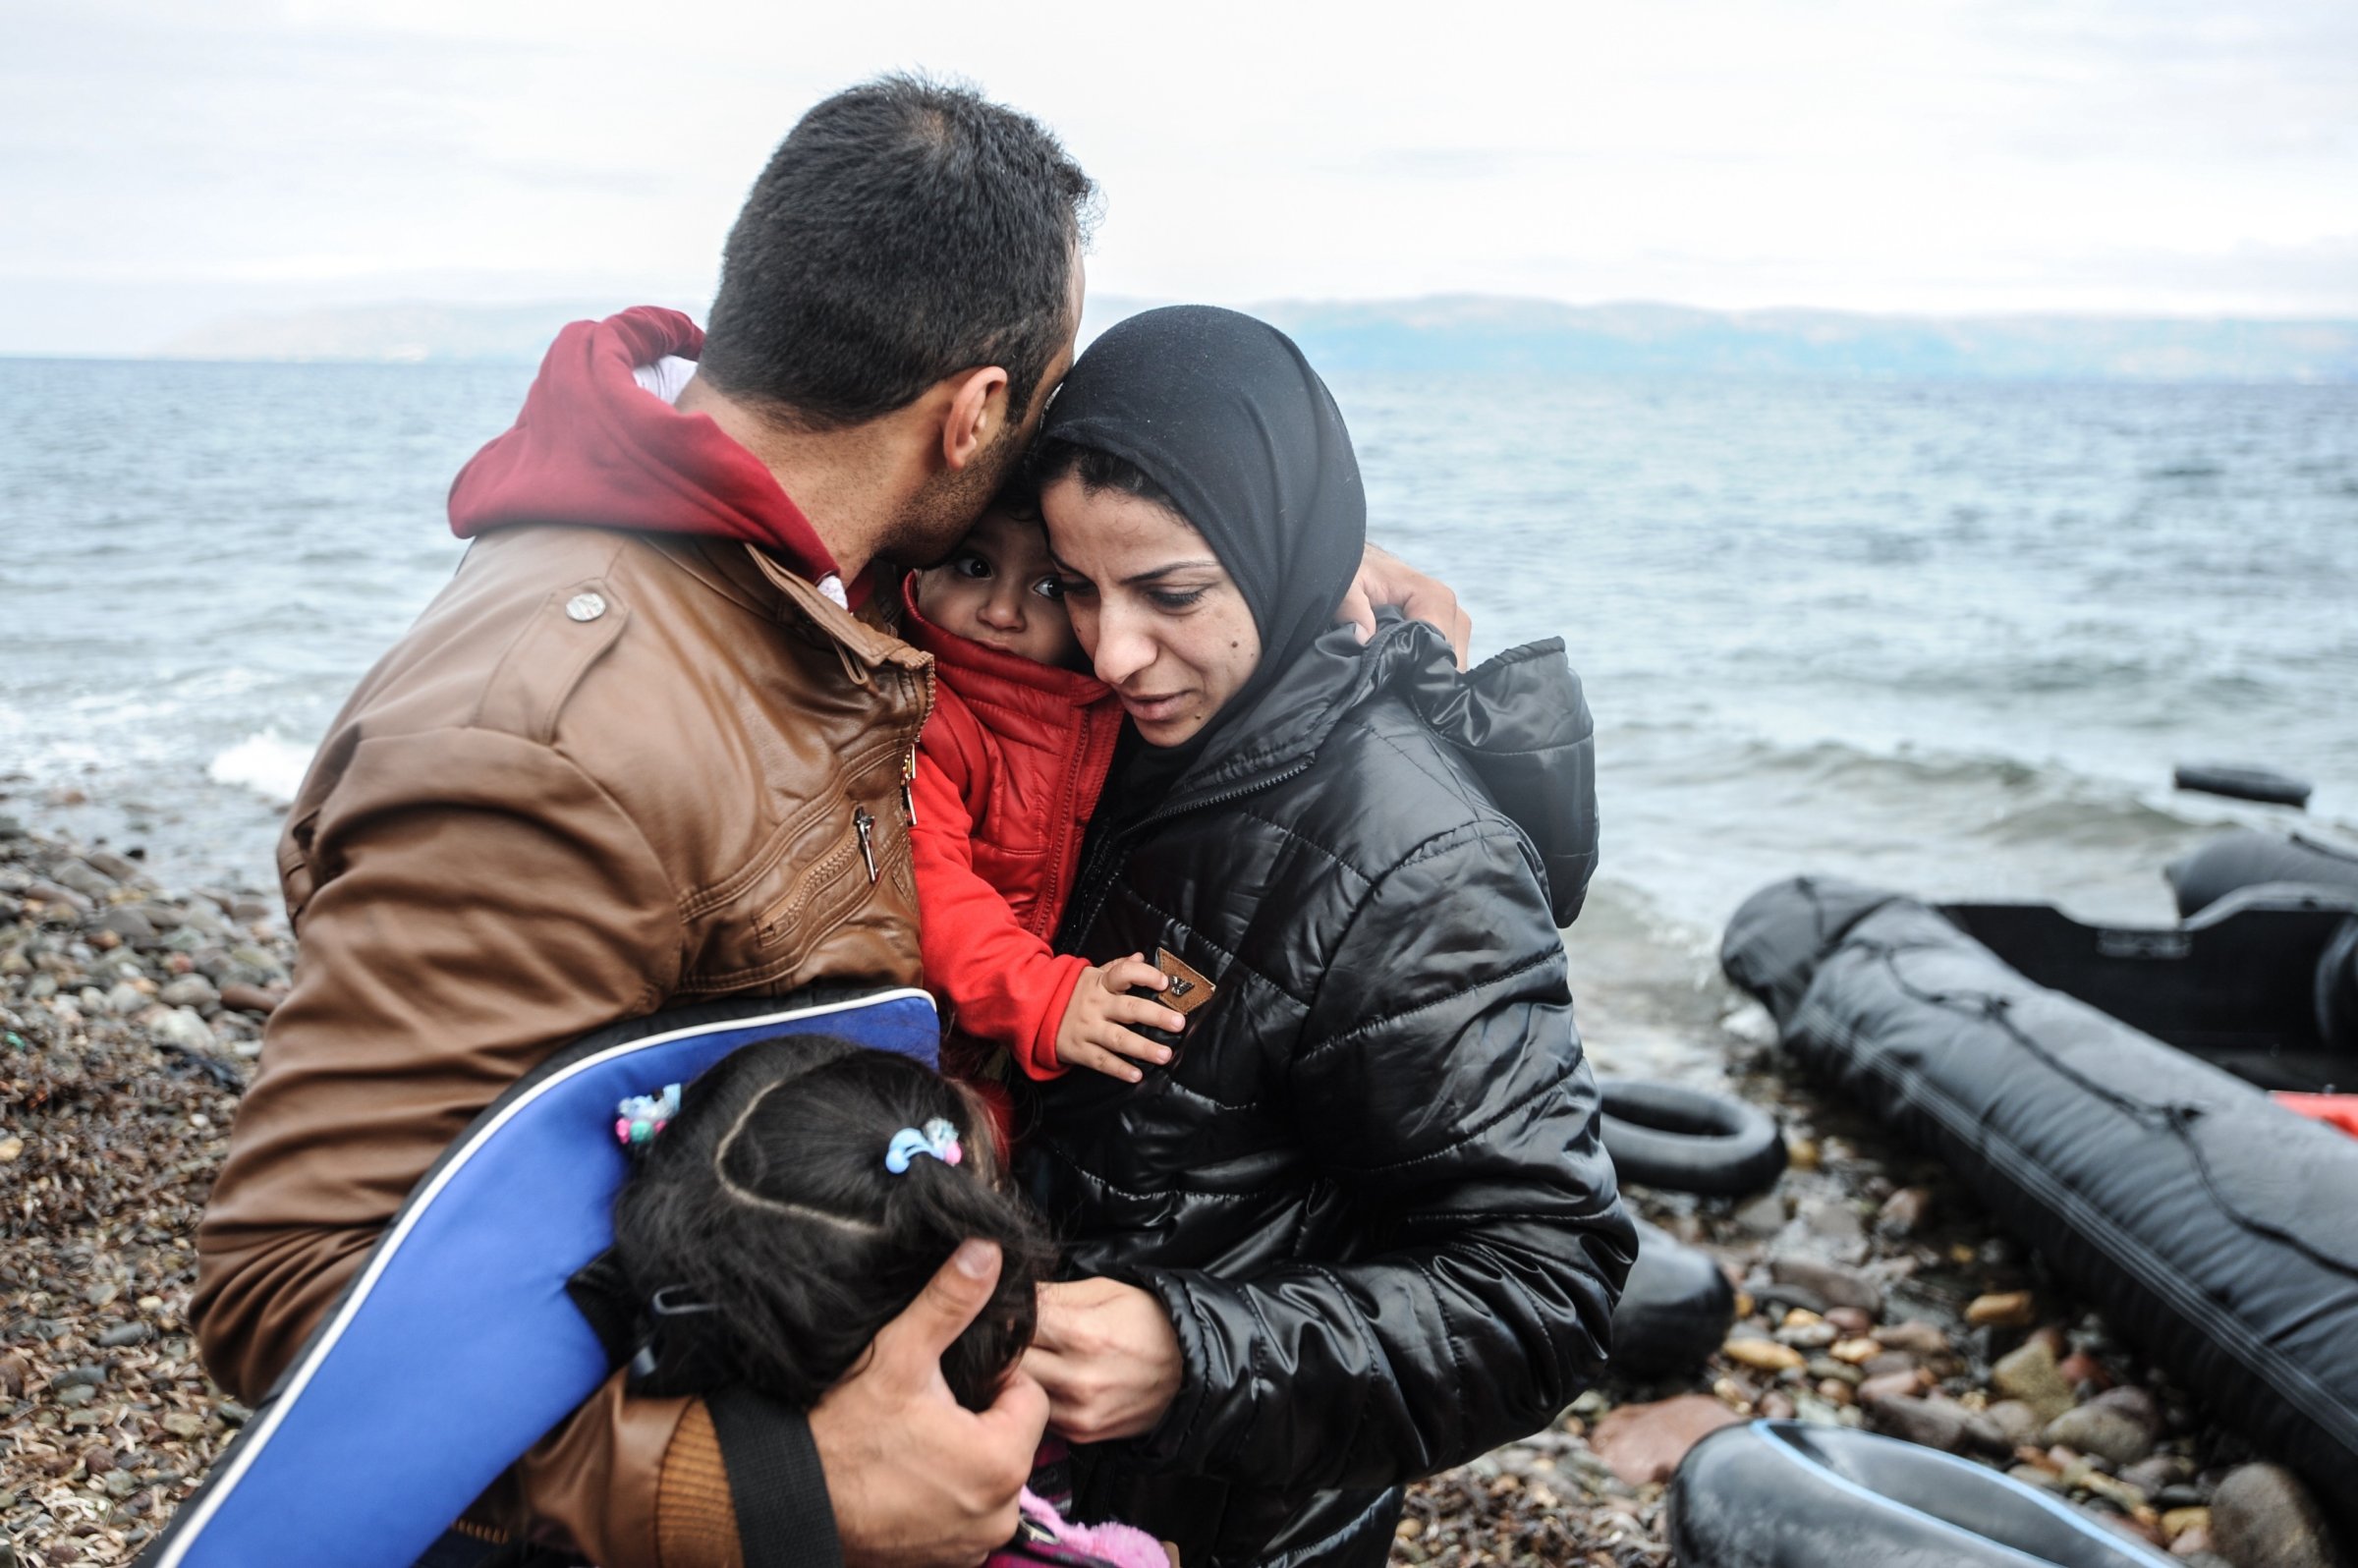 Refugees situation in Greece